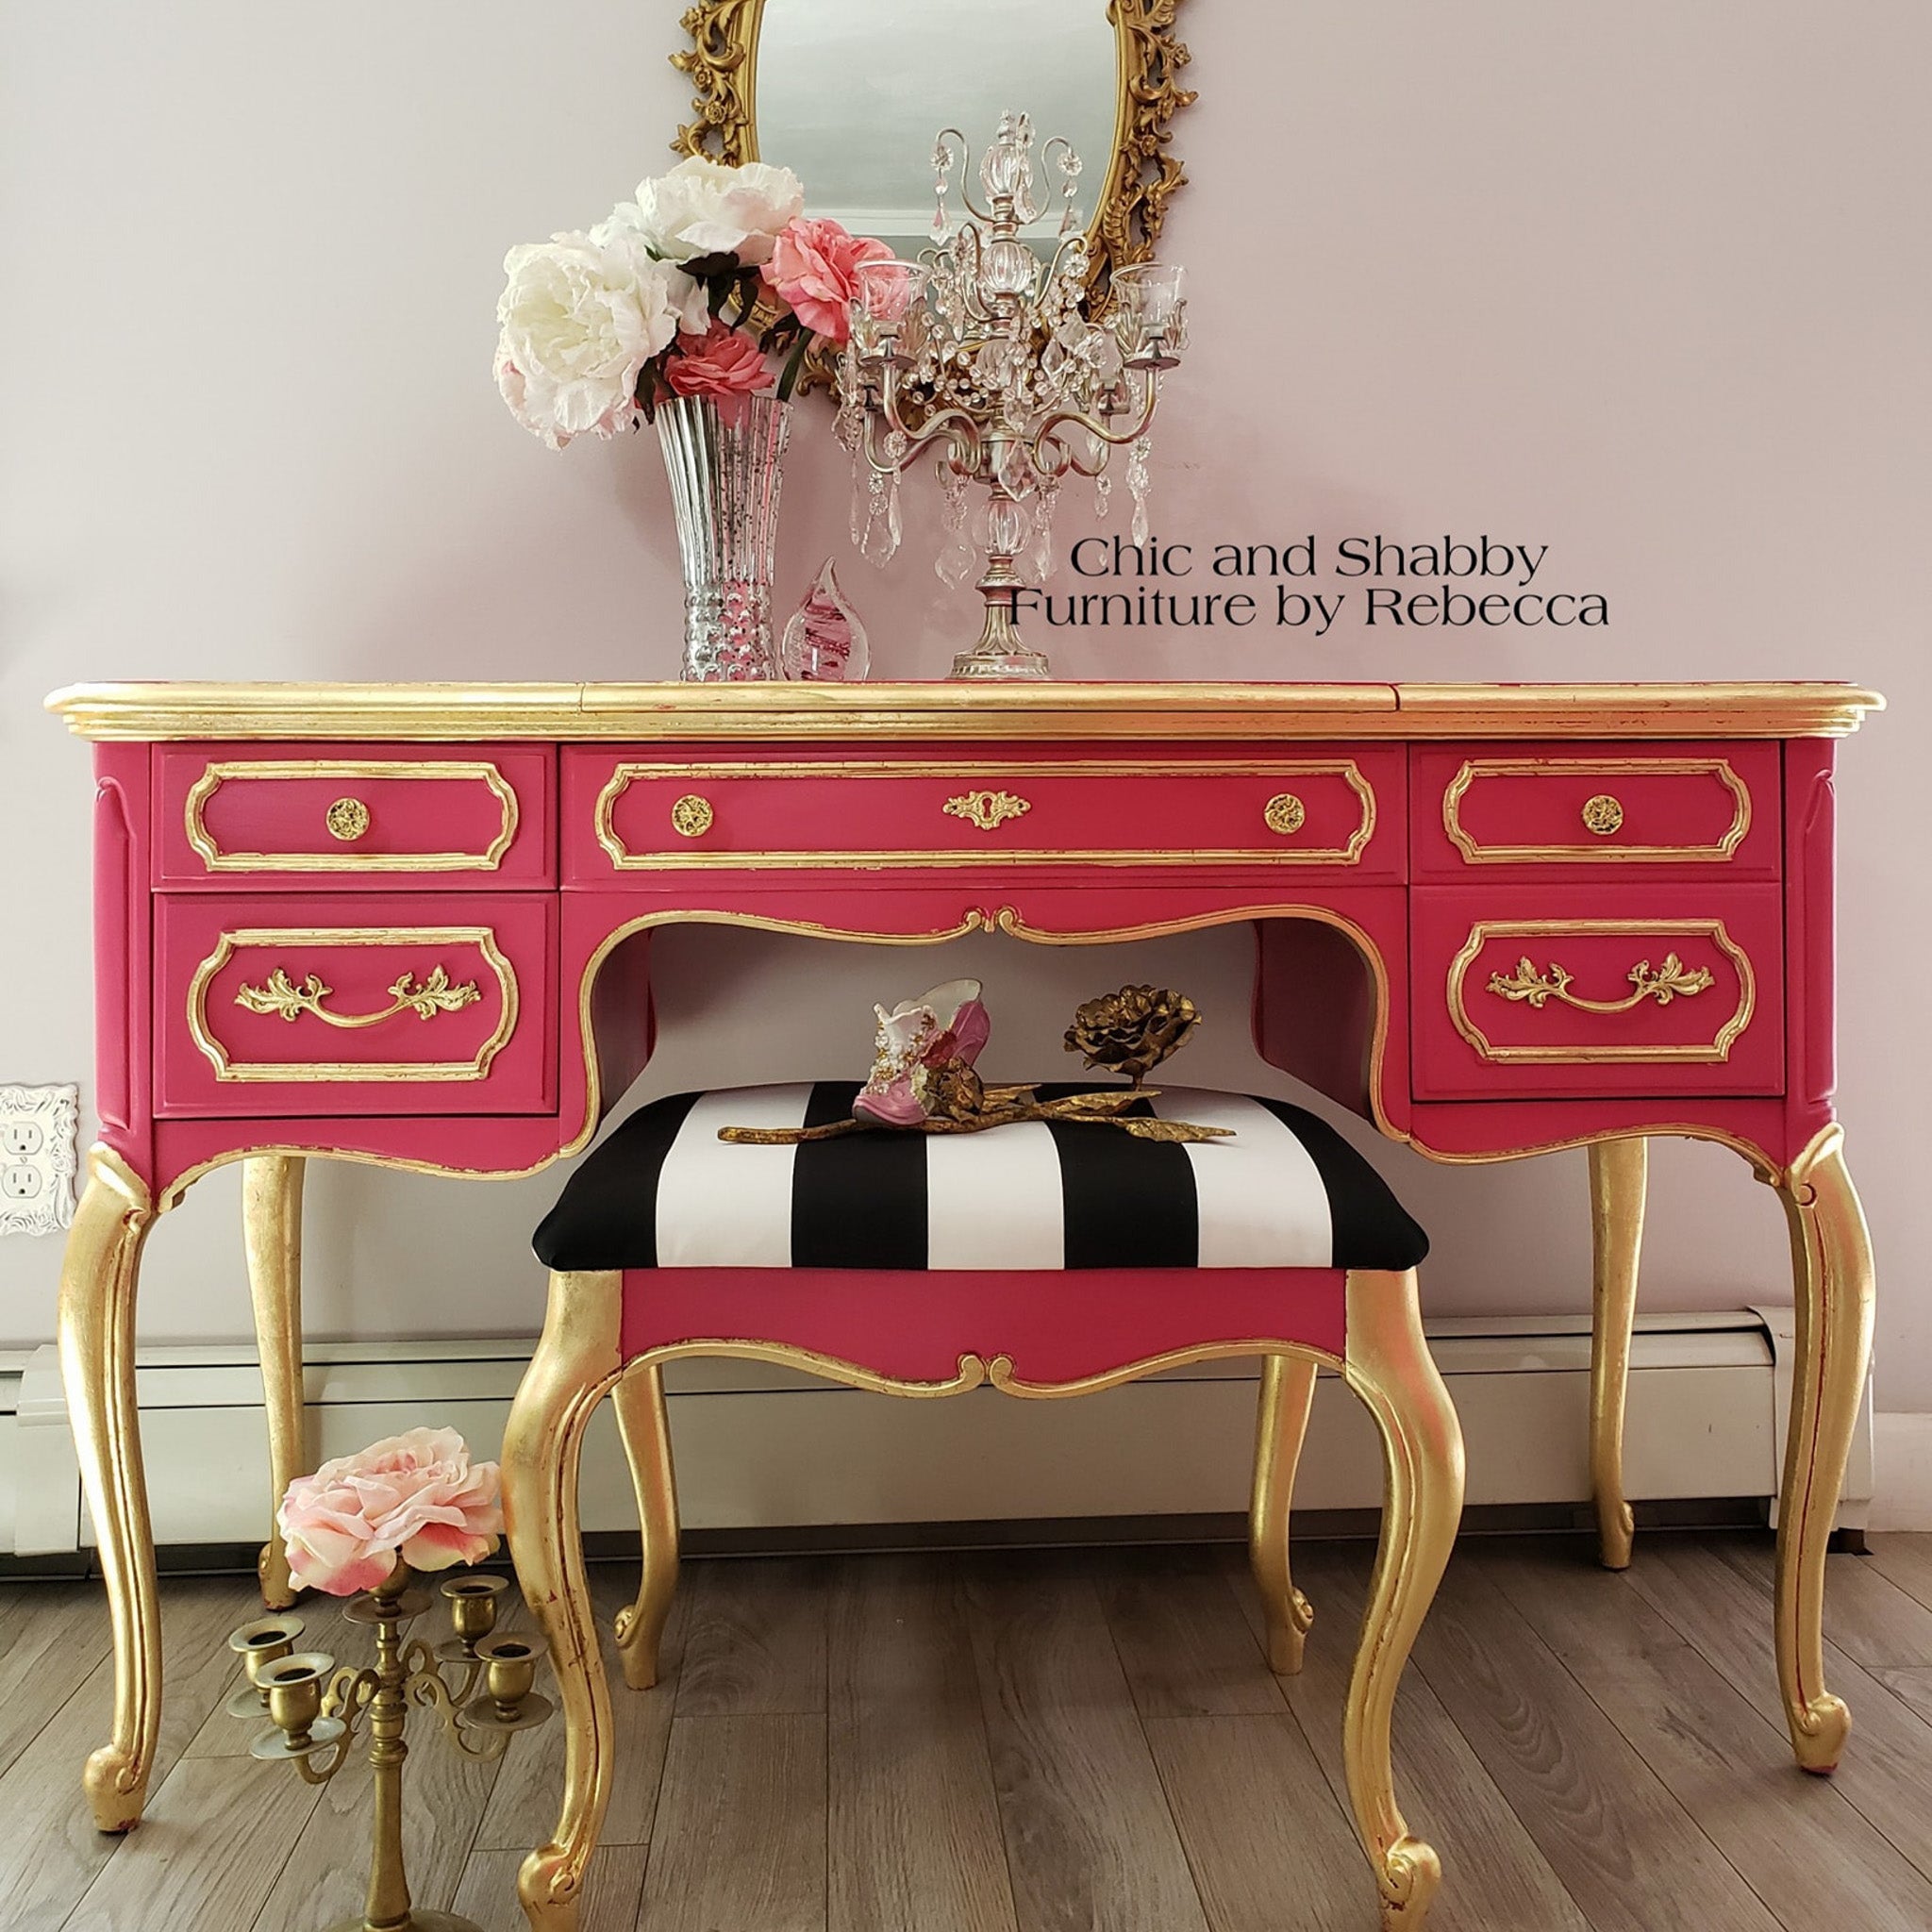 A vintage vanity and stool refurbished by Chic and Shabby Furniture by Rebecca is painted in Dixie Belle's Peony chalk mineral paint and is accented with gold trim and legs.